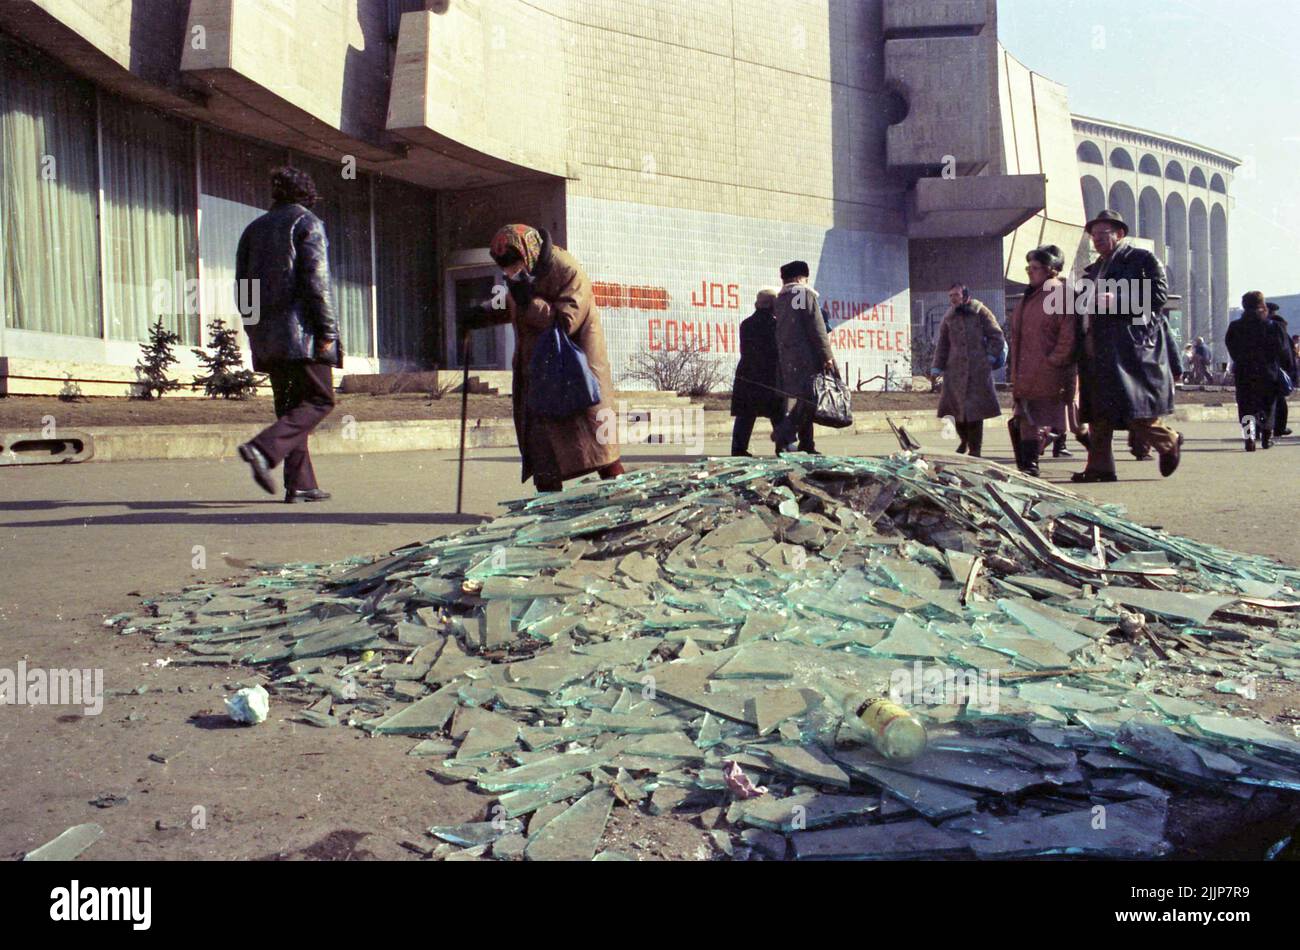 Bucharest, Romania, January 1989. People passing by broken glass and debris in the University Square, by the Intercontinental Hotel, days after the anti-communist revolution of December 1989. On the wall behind it is written: 'Down with communism' & 'Throw away your (Communist Party) IDs'. Stock Photo